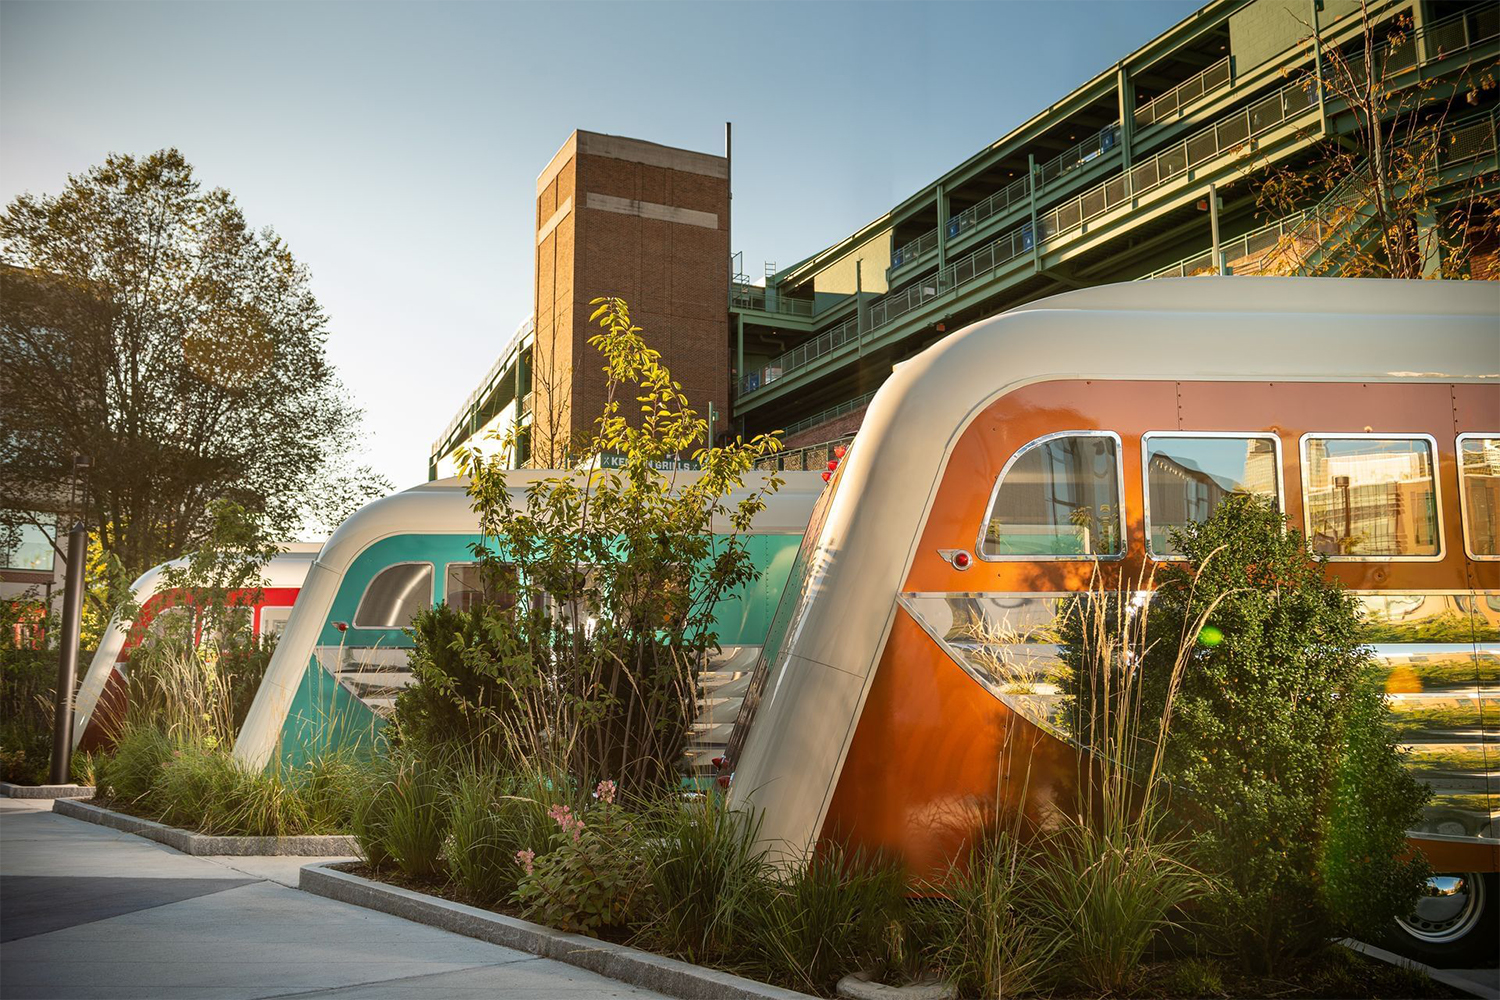 The retro trailers that you can stay in near Fenway Park as part of Backstage at the Verb